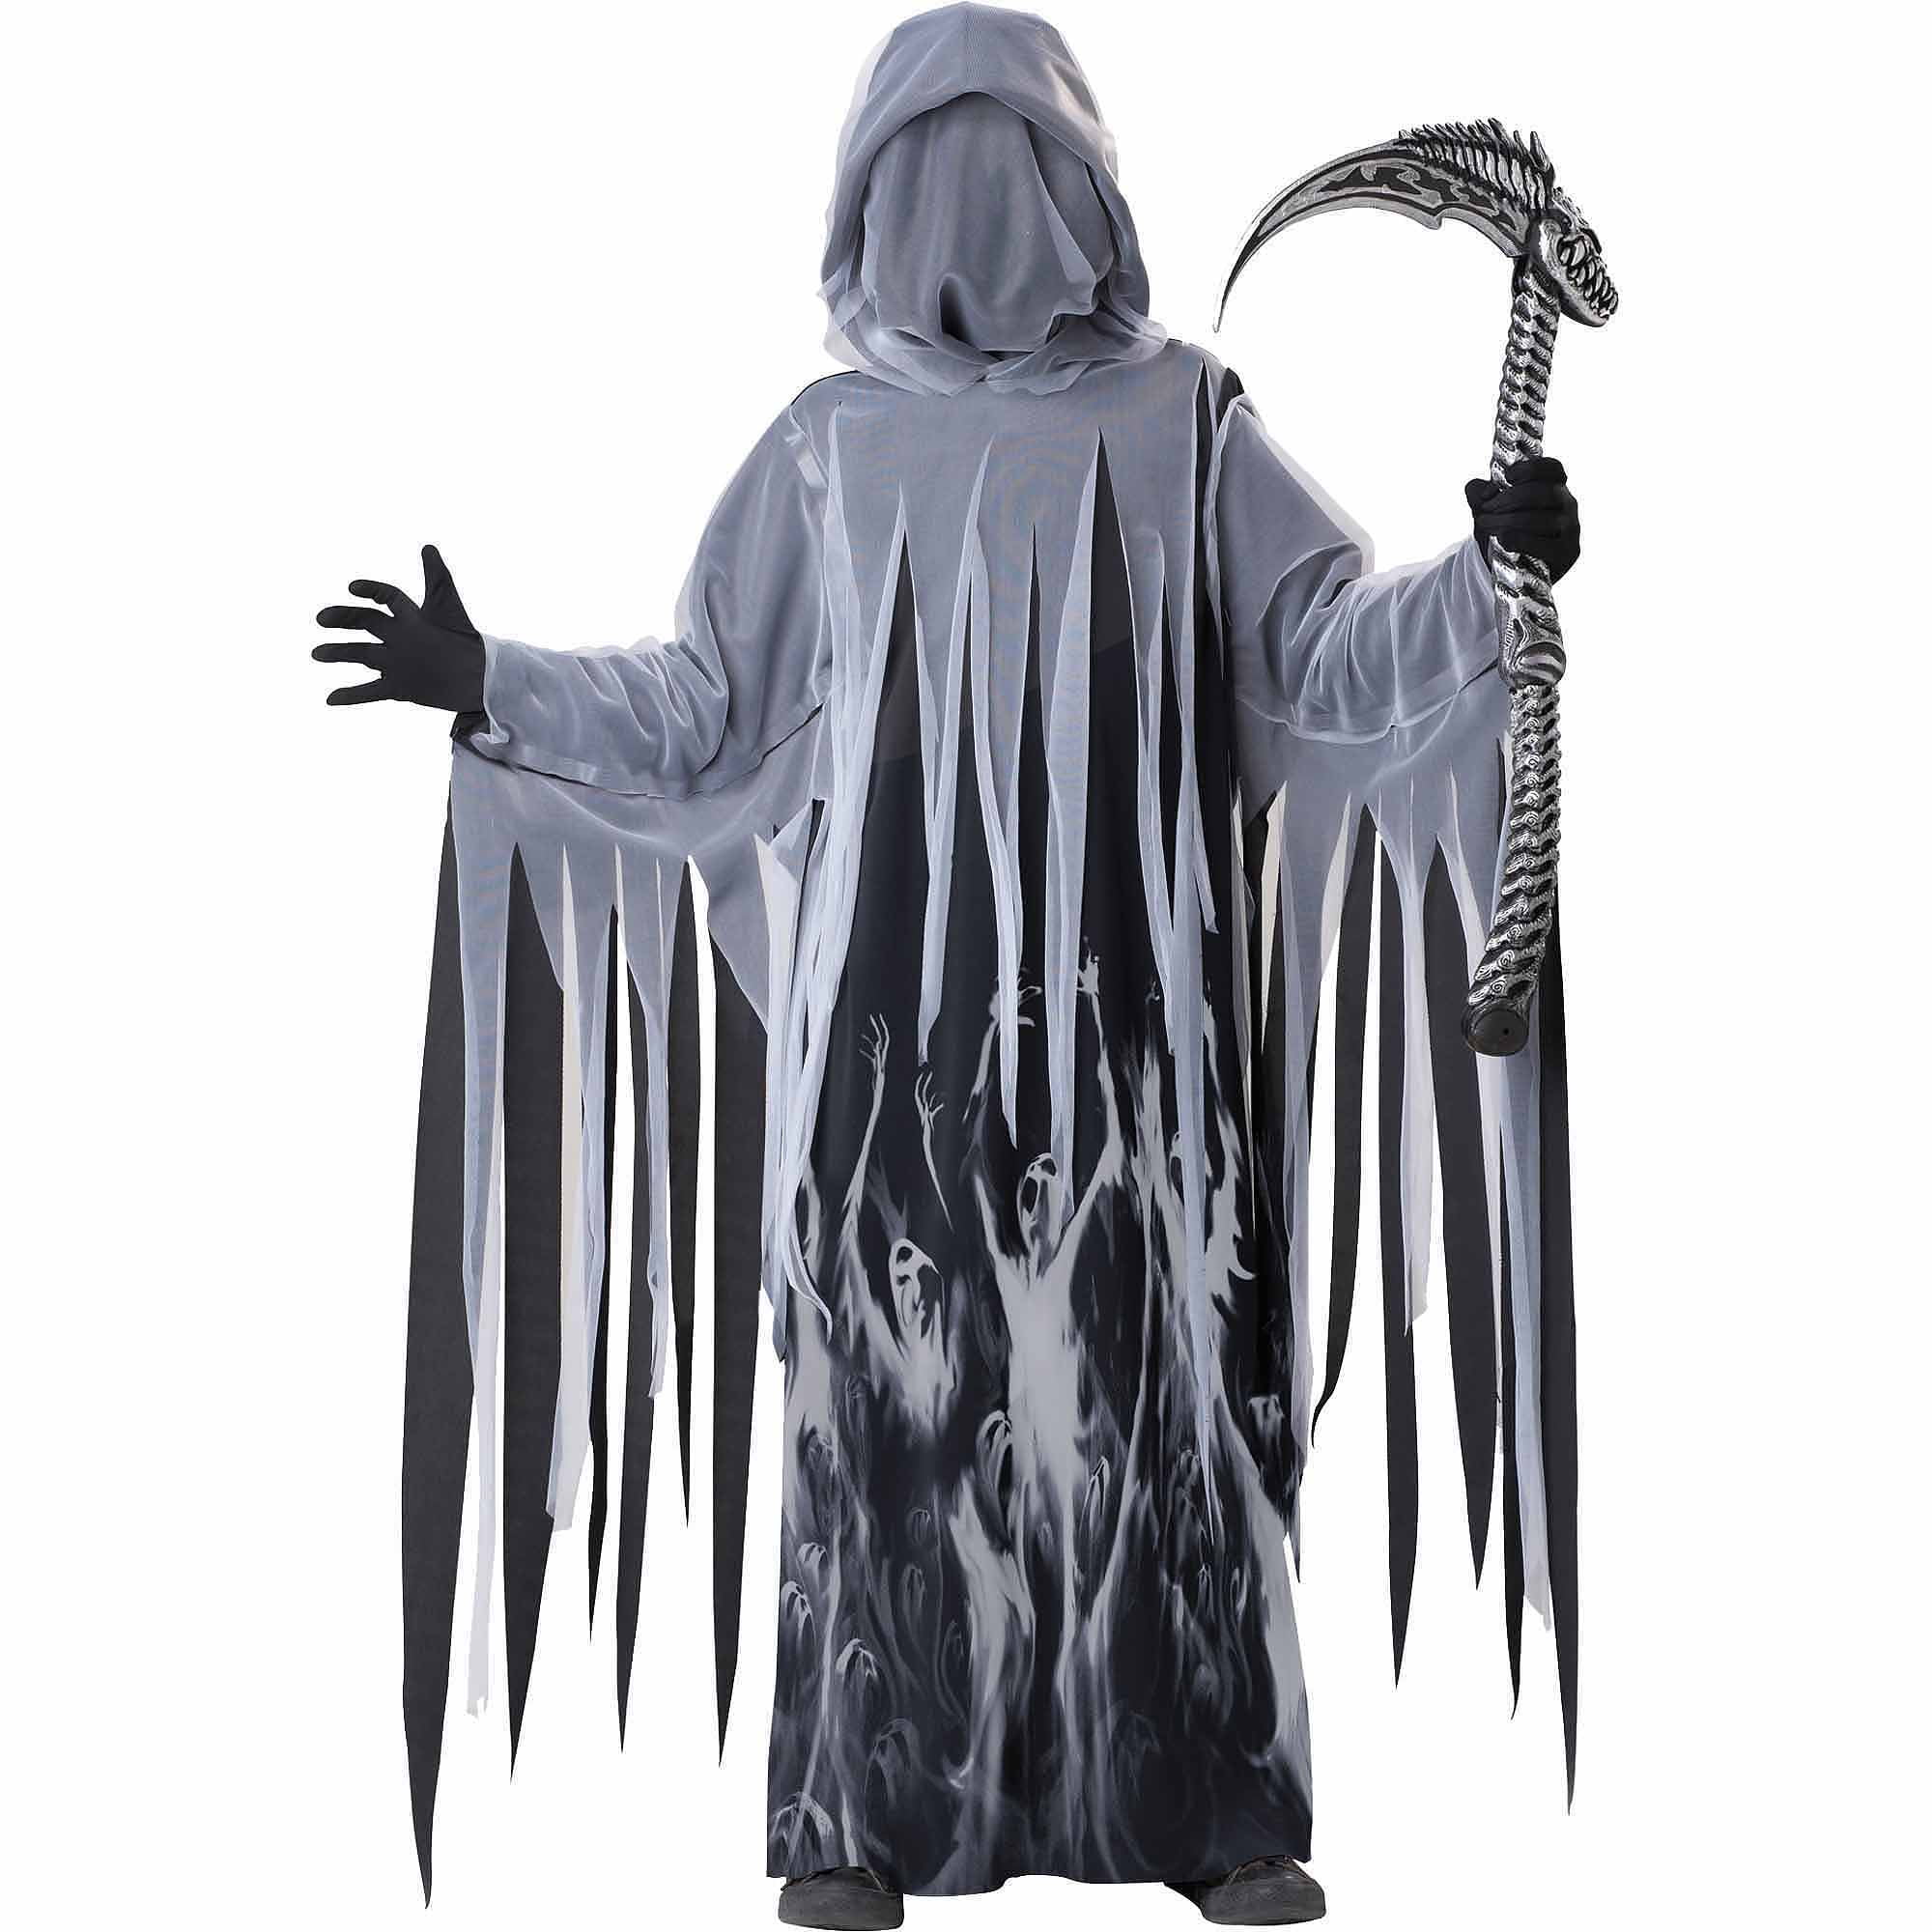 Details about   Ghoul Costume Boys Walmart 5149110 